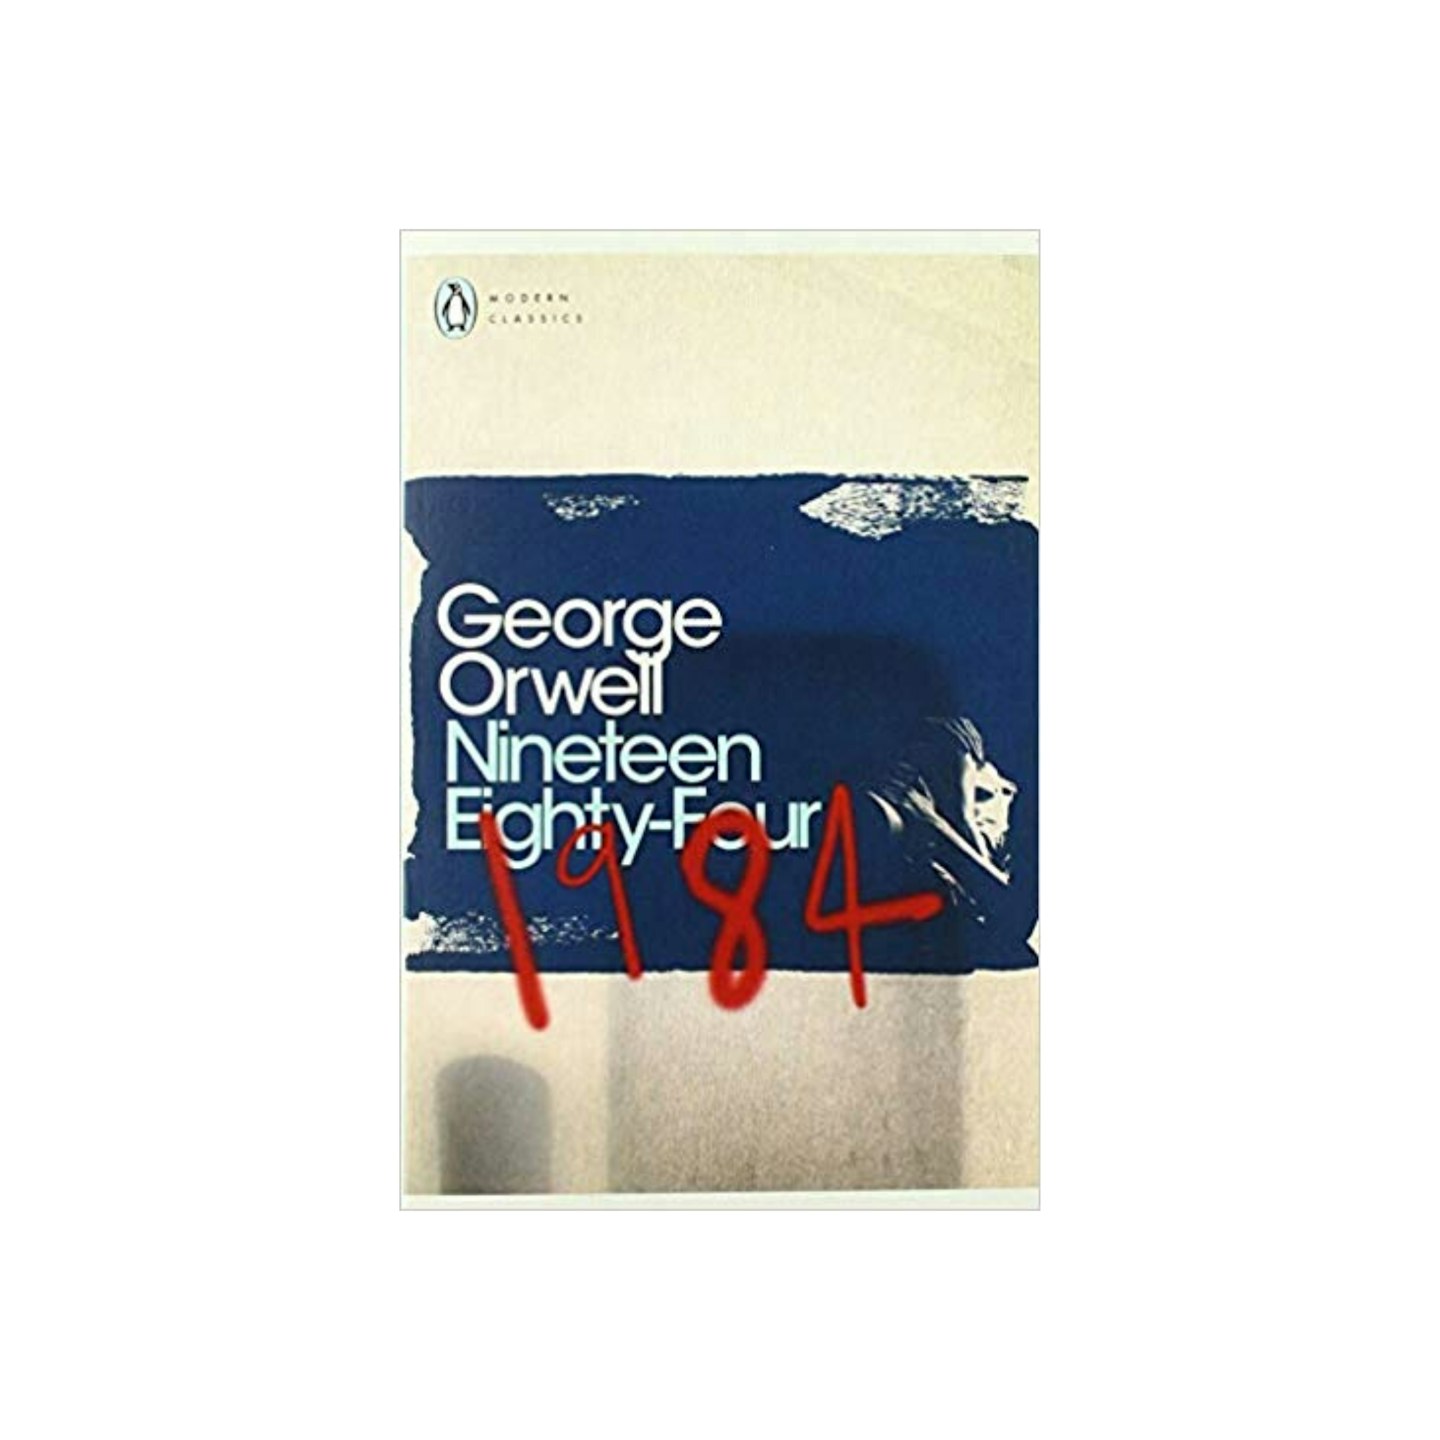 1984 Nineteen Eighty-Four by George Orwell